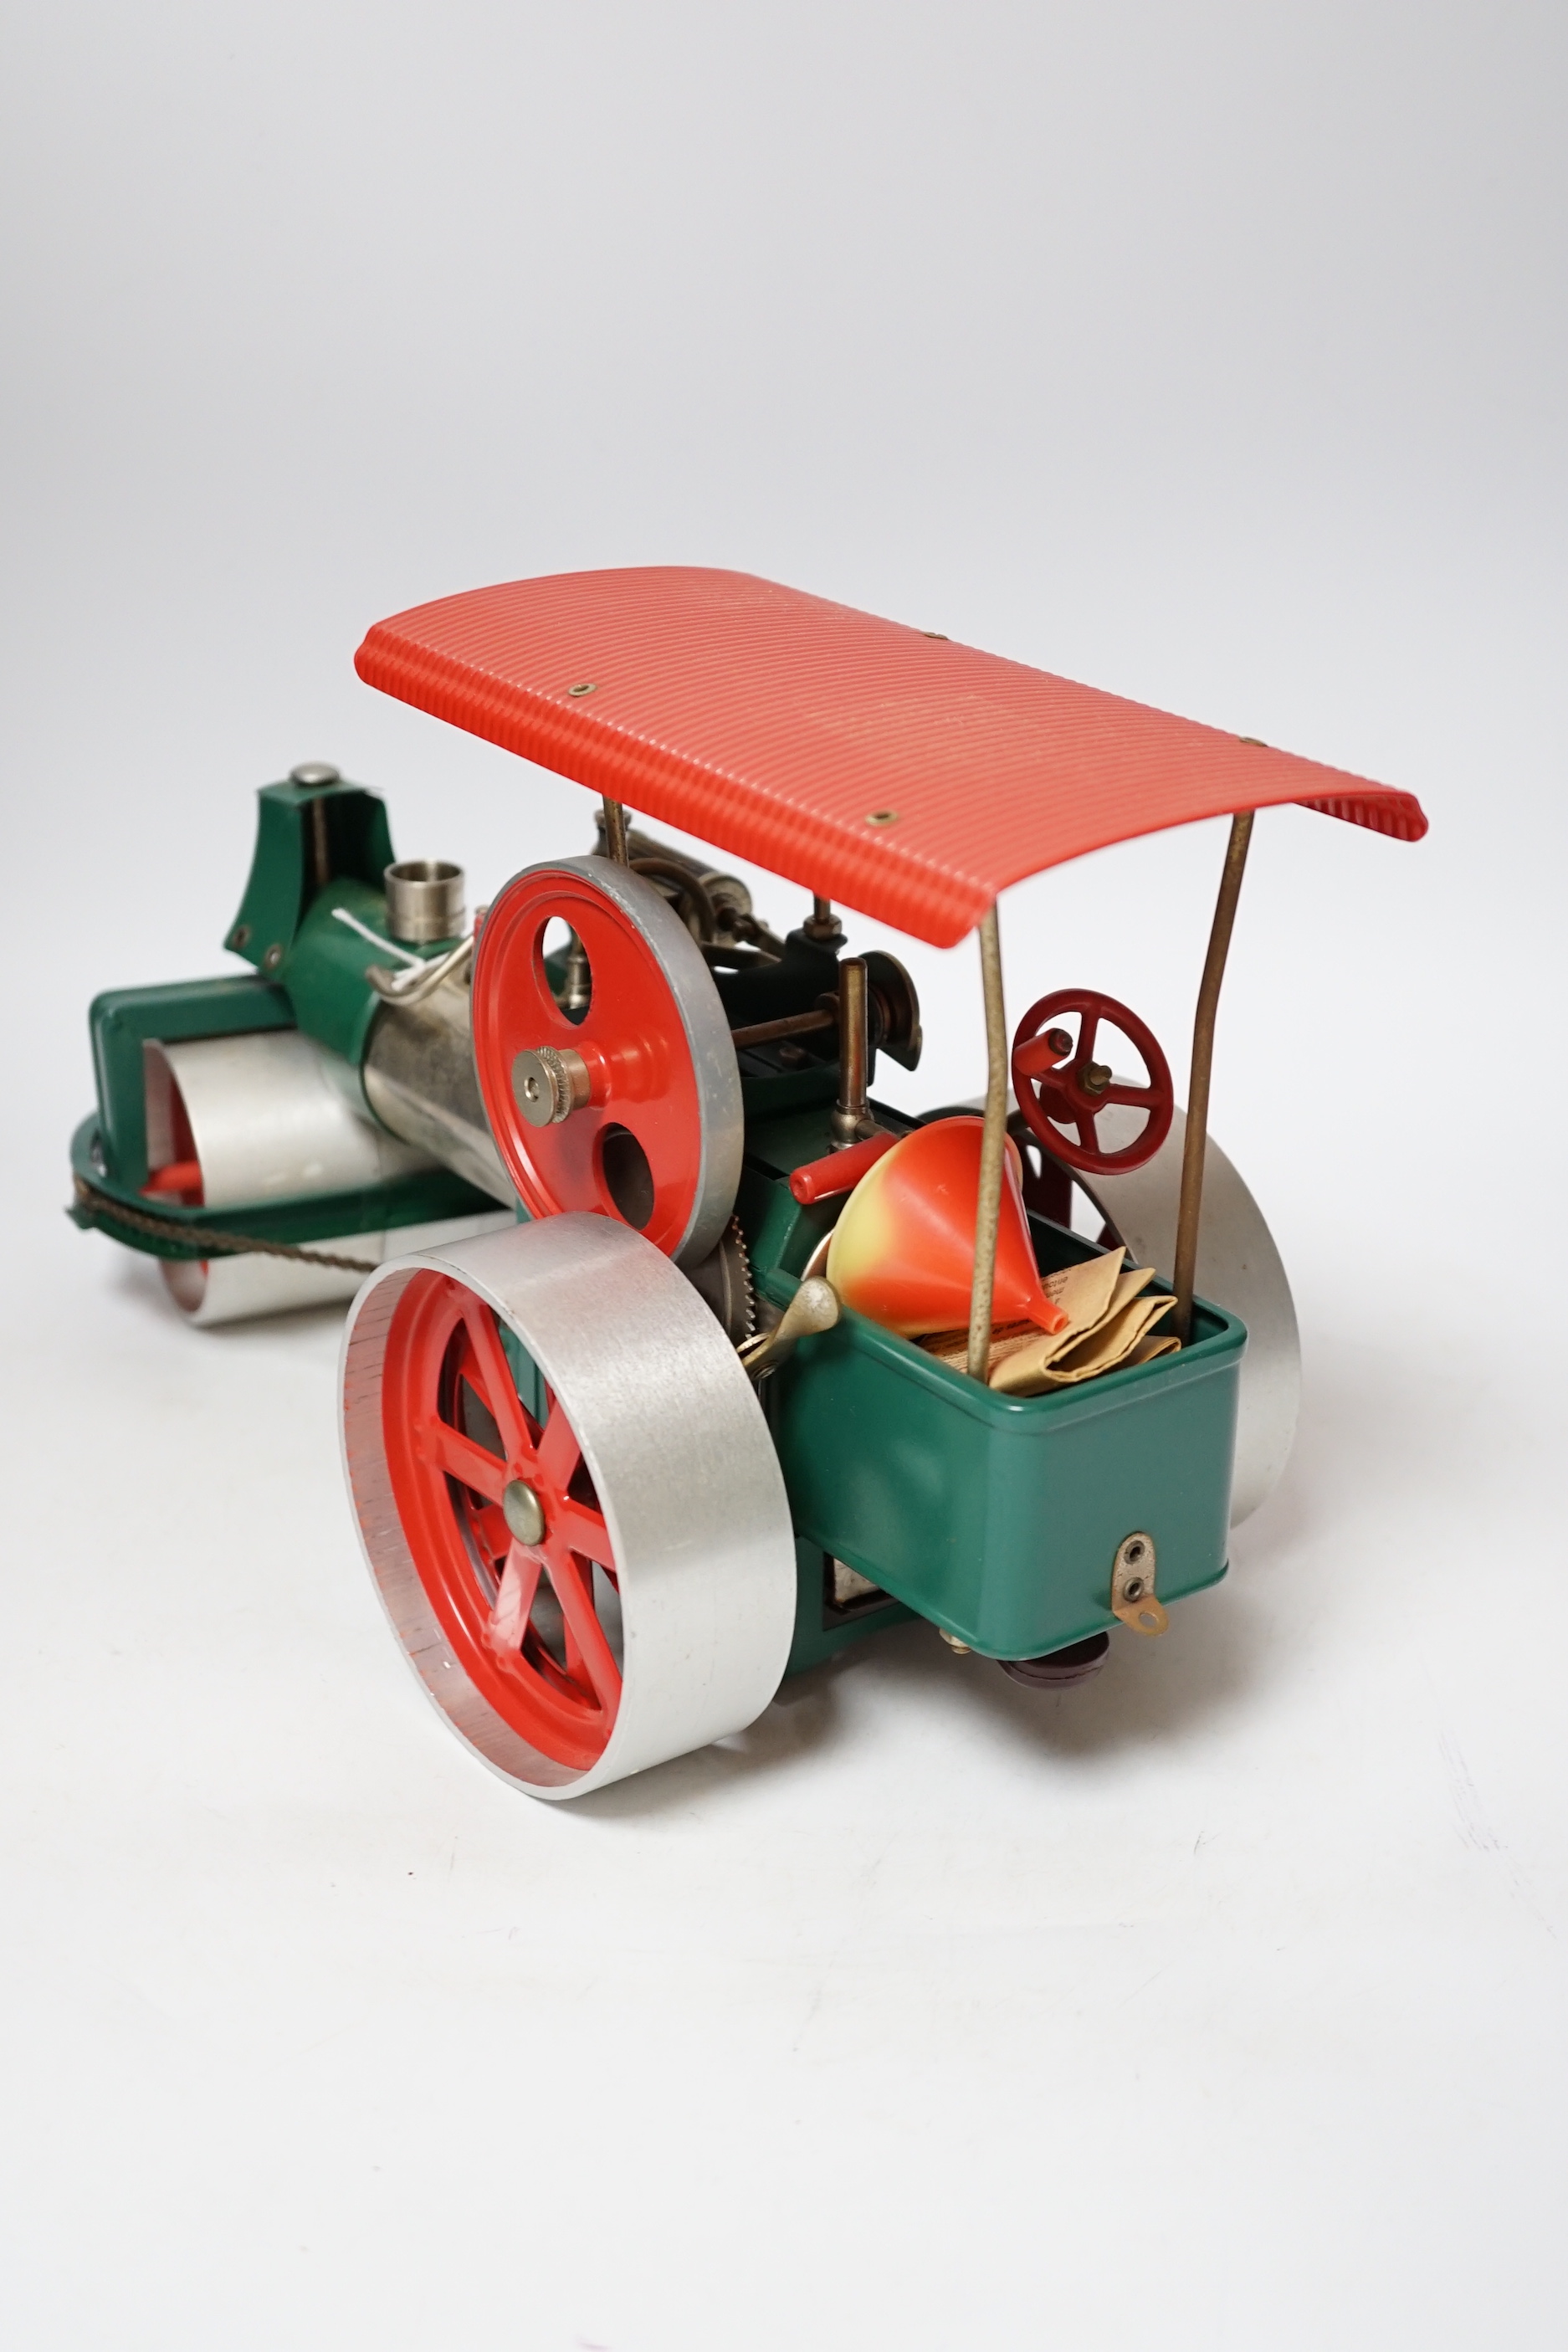 A Wilesco live steam tinplate and aluminium model Road Roller, missing its chimney